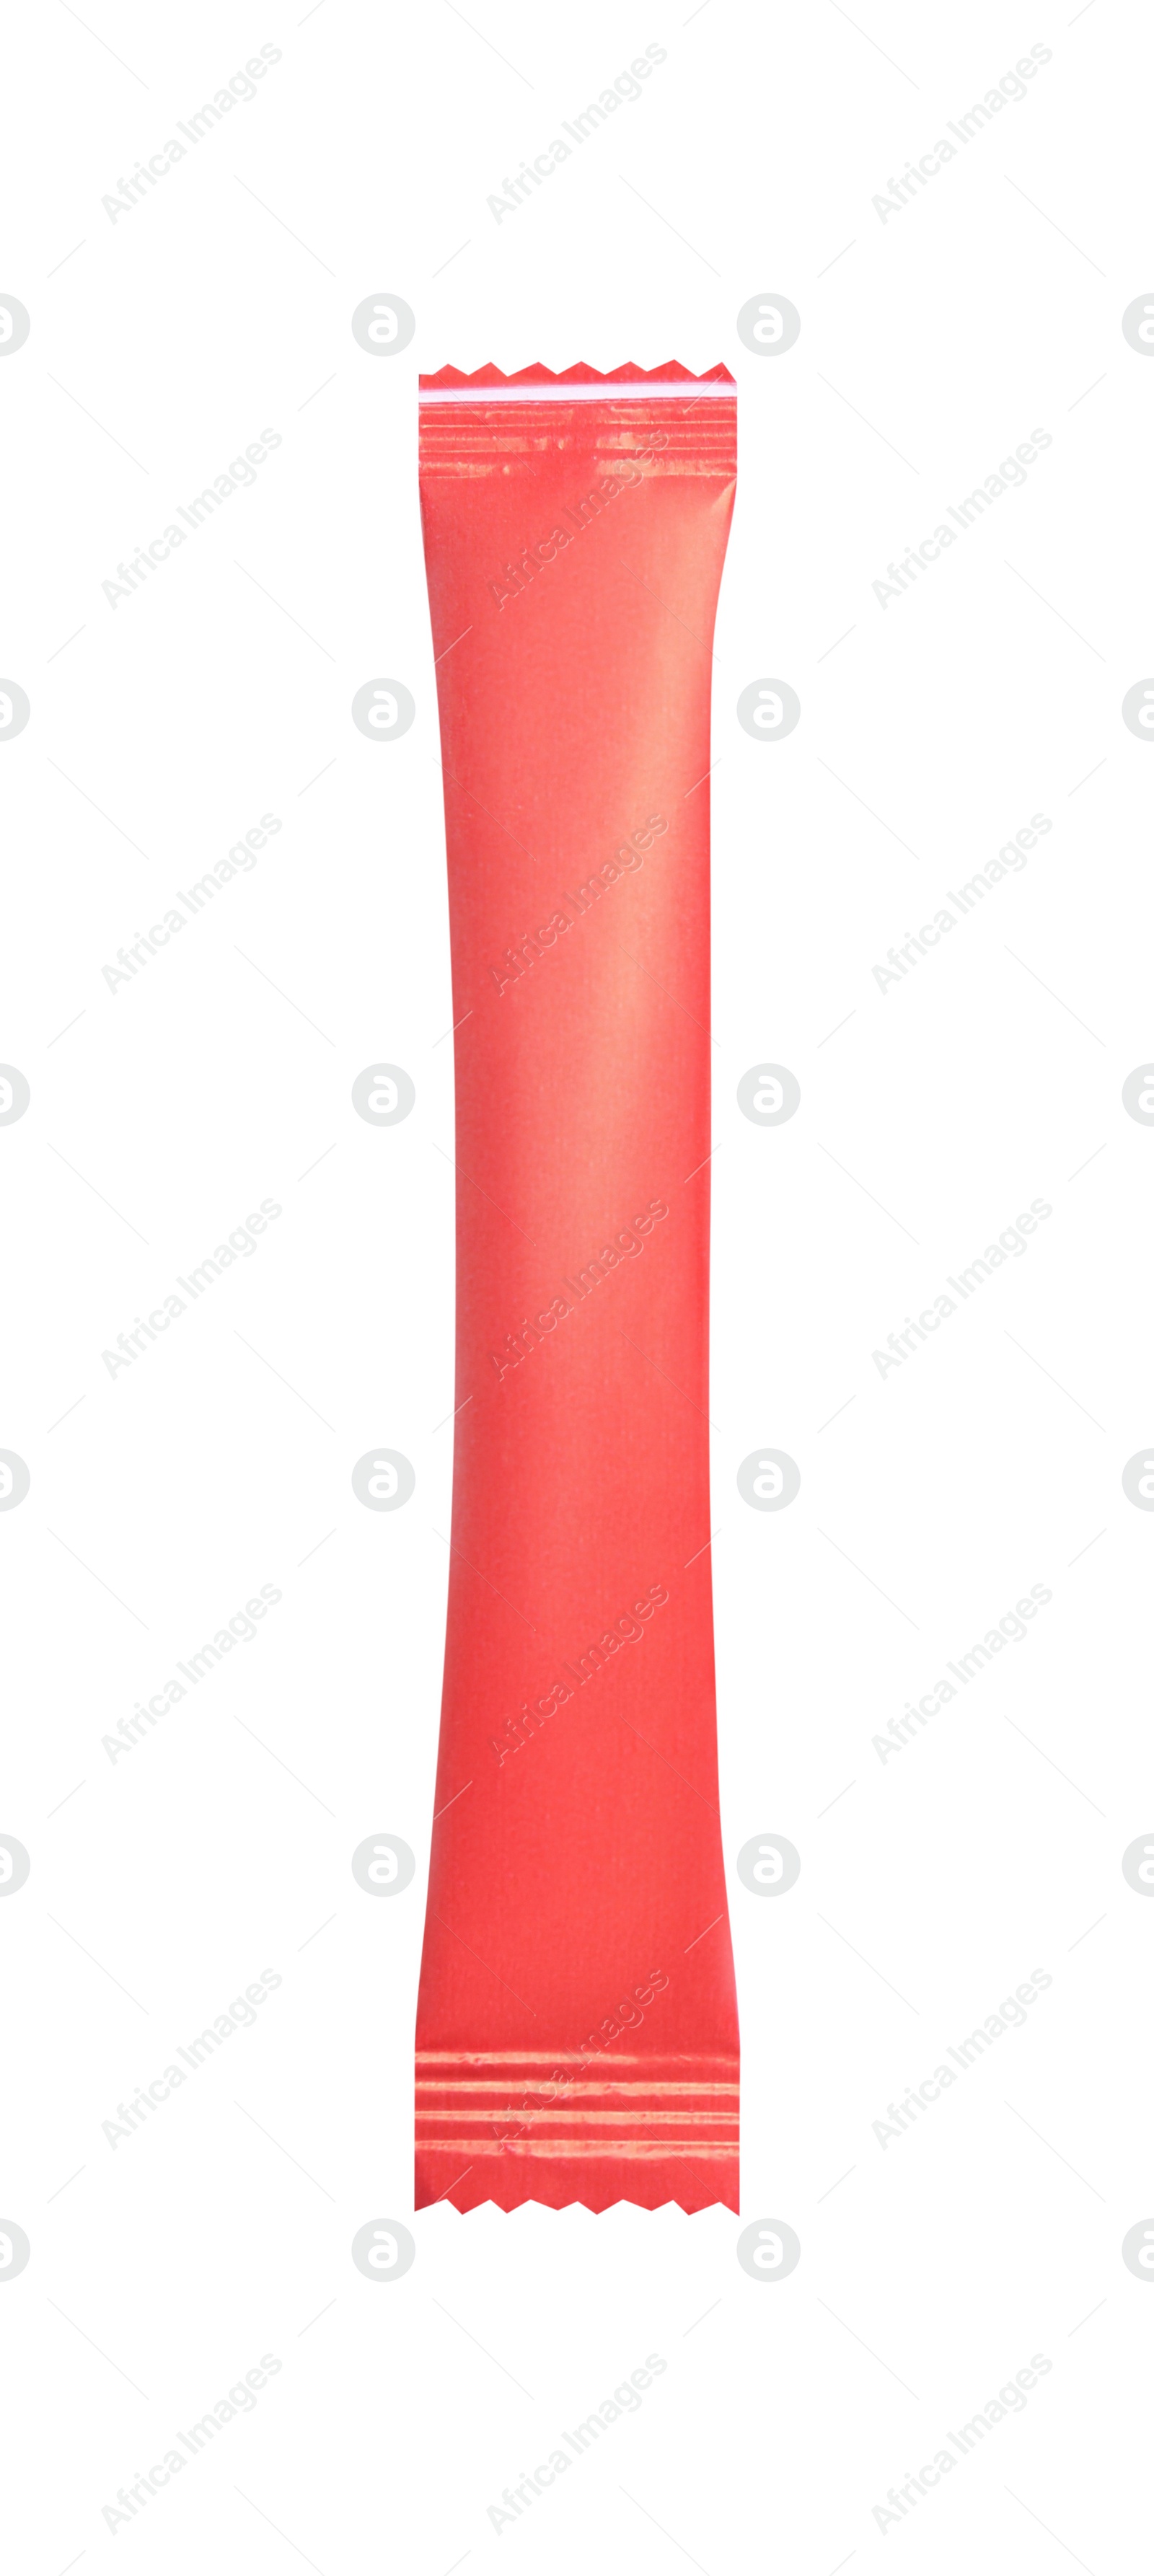 Photo of Red stick of sugar isolated on white